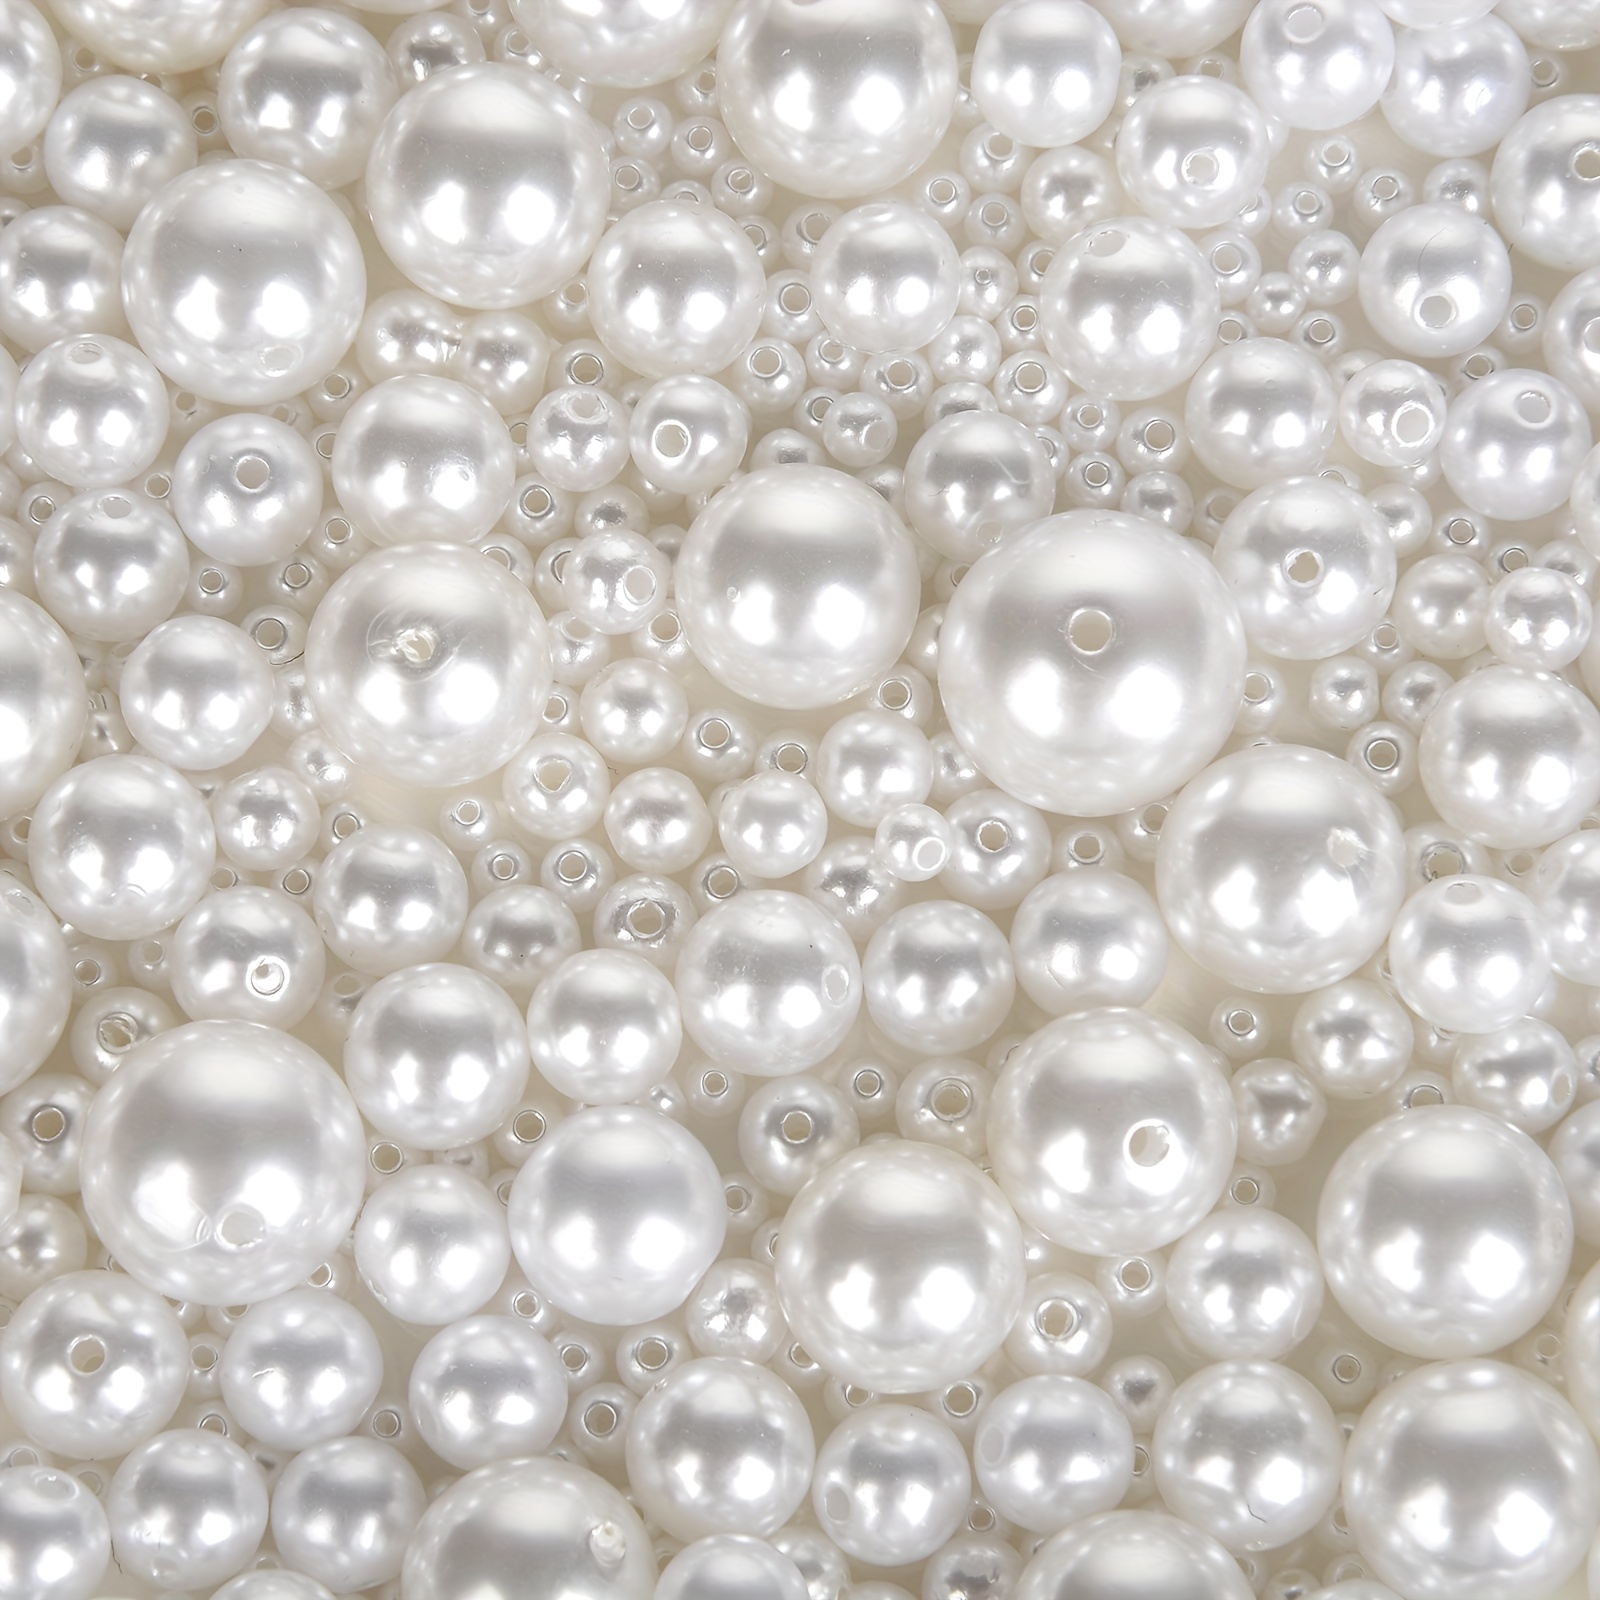 Feildoo 6mm ABS Pearls Beads Craft Supplies, Round Faux Smooth ABS